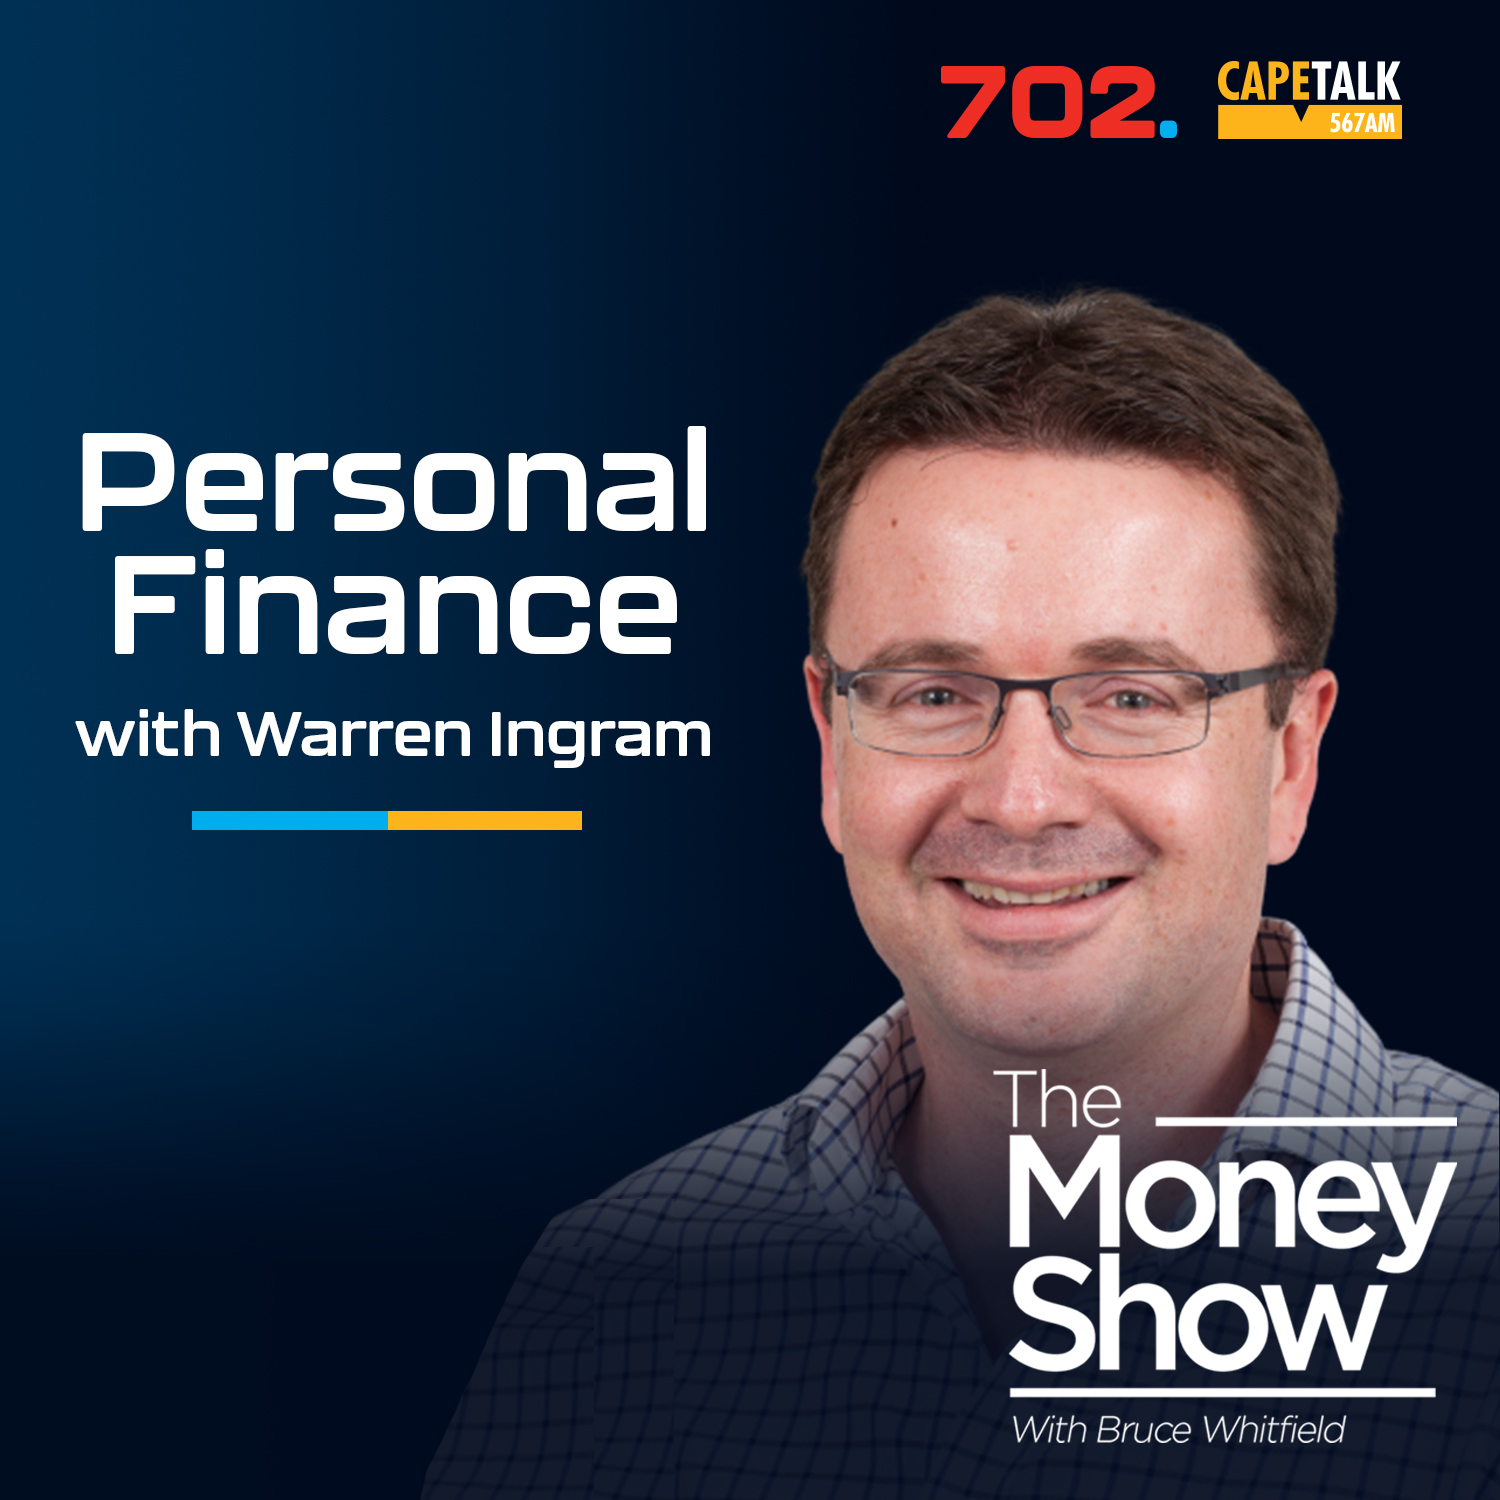 Personal Finance - Not all personal finance rules are cast in stone